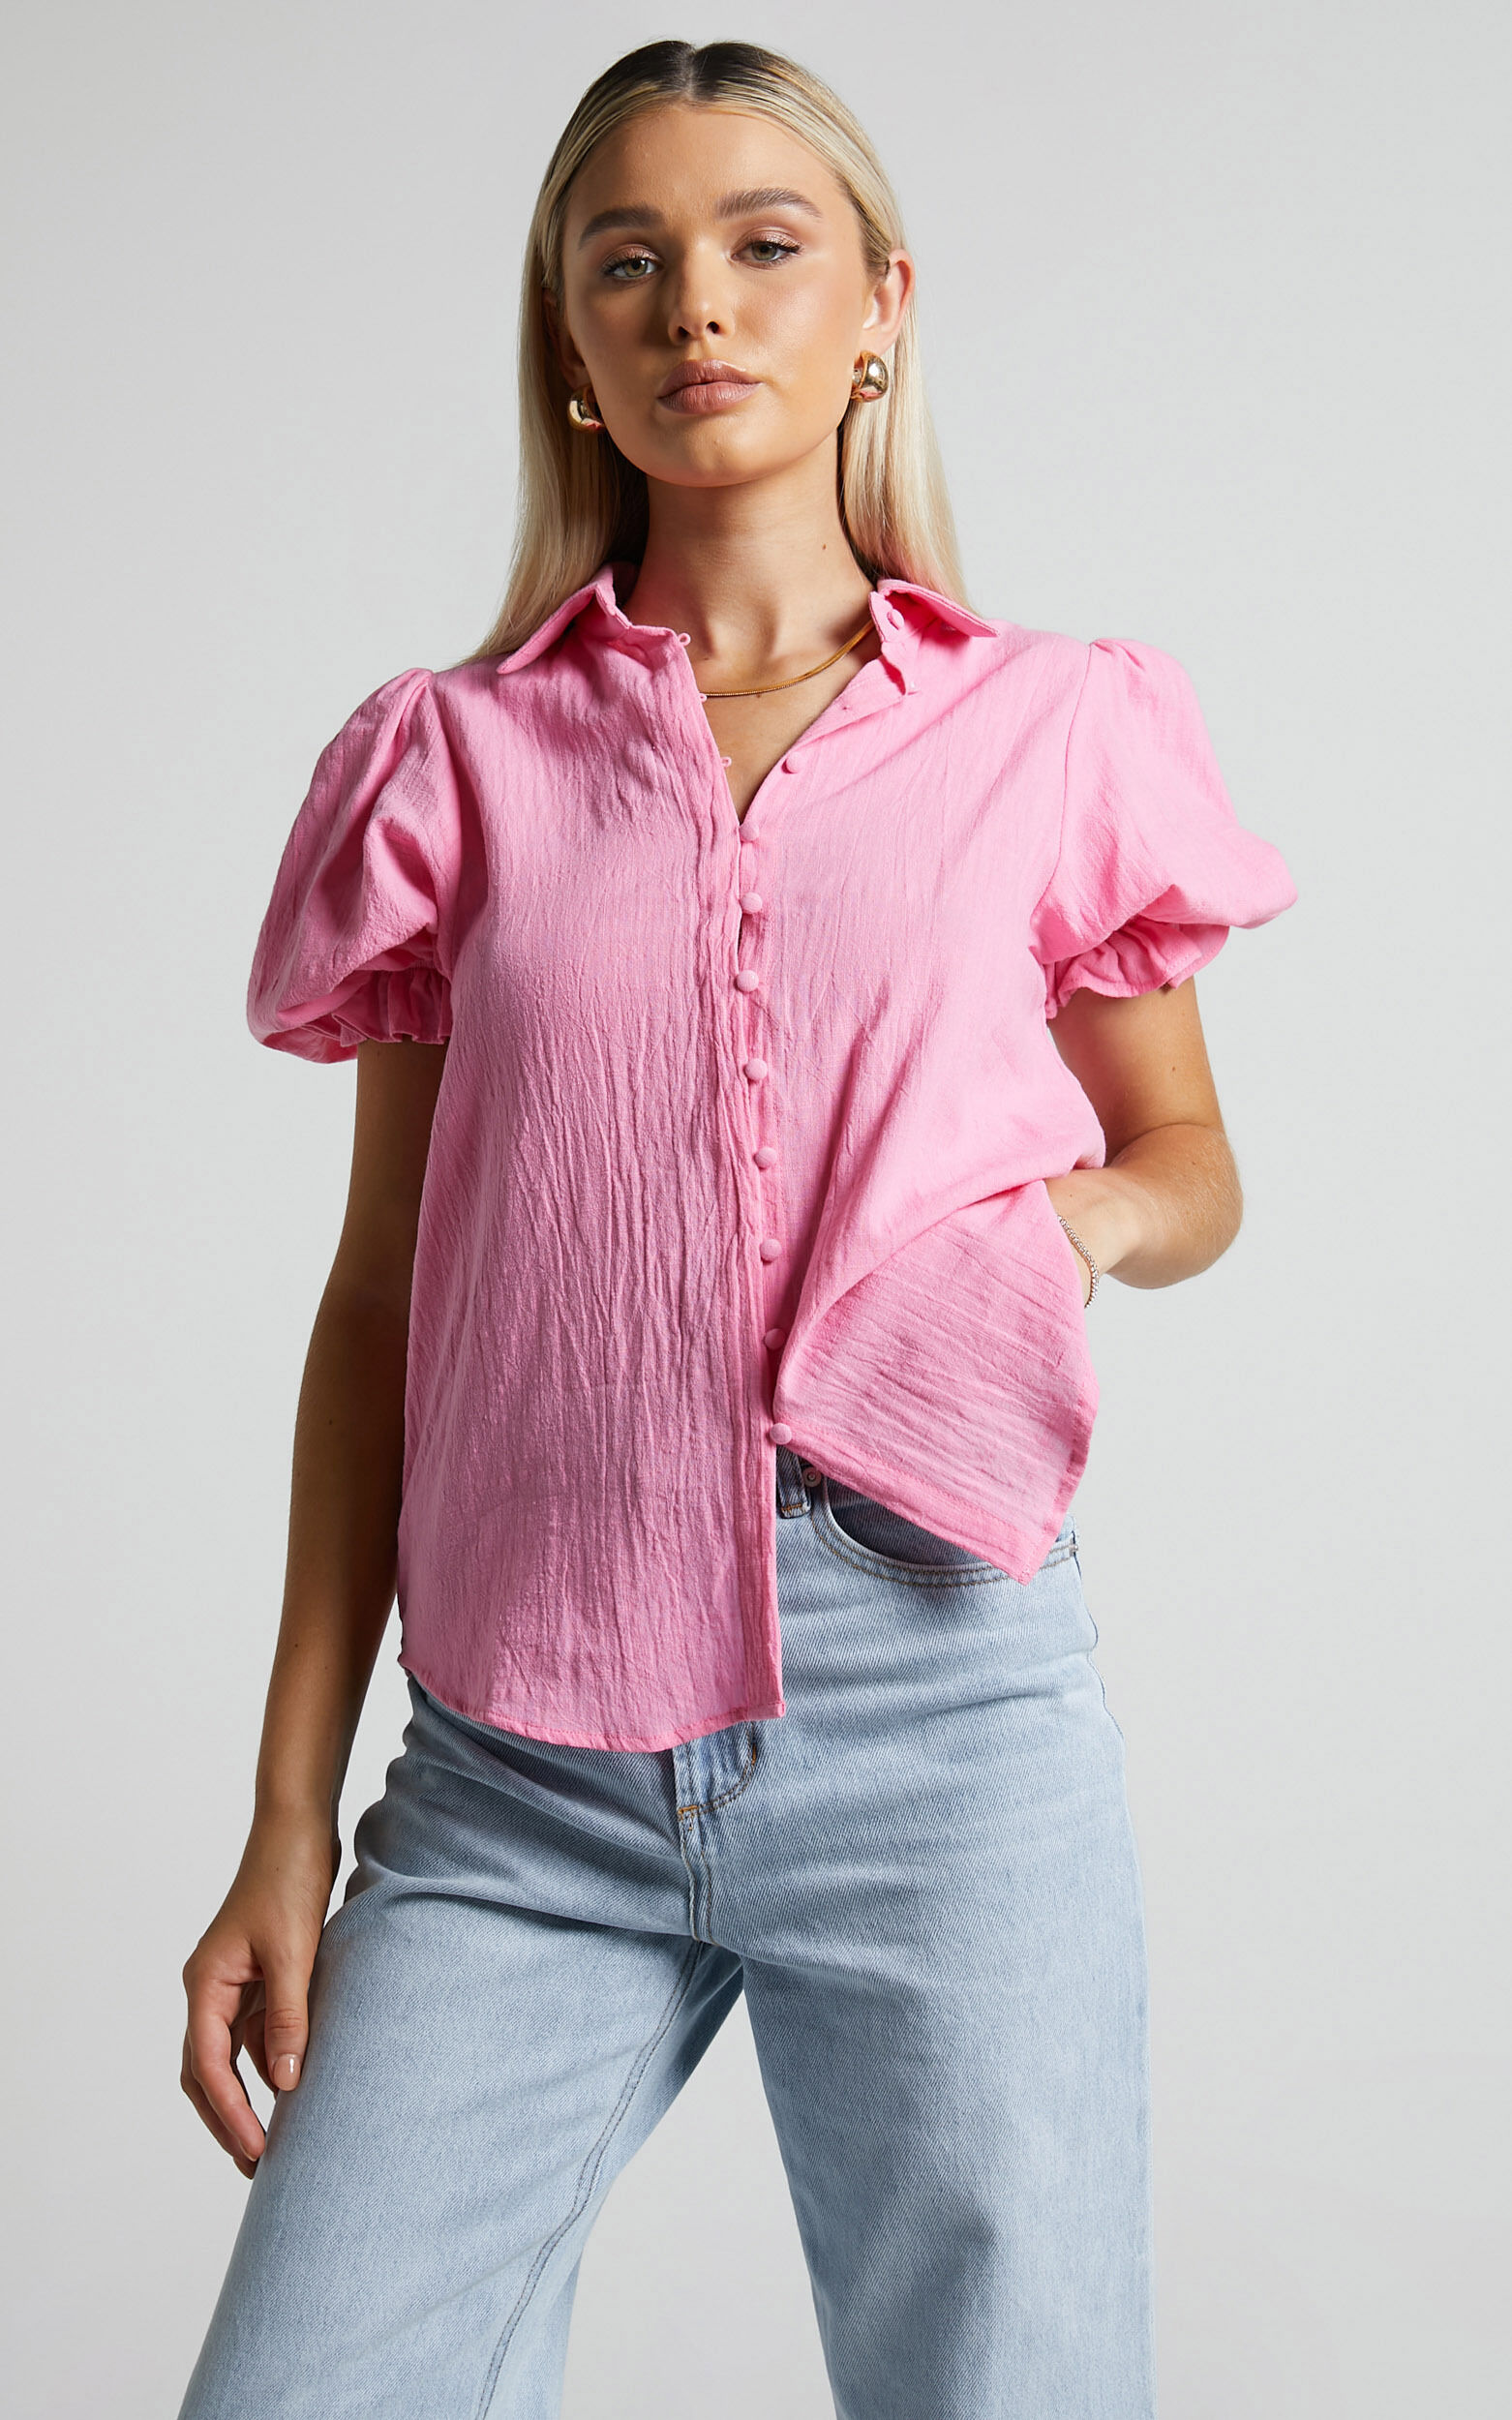 Jhelia Top - Puff Sleeve Button Up Blouse in Candy Pink - 06, PNK1, super-hi-res image number null